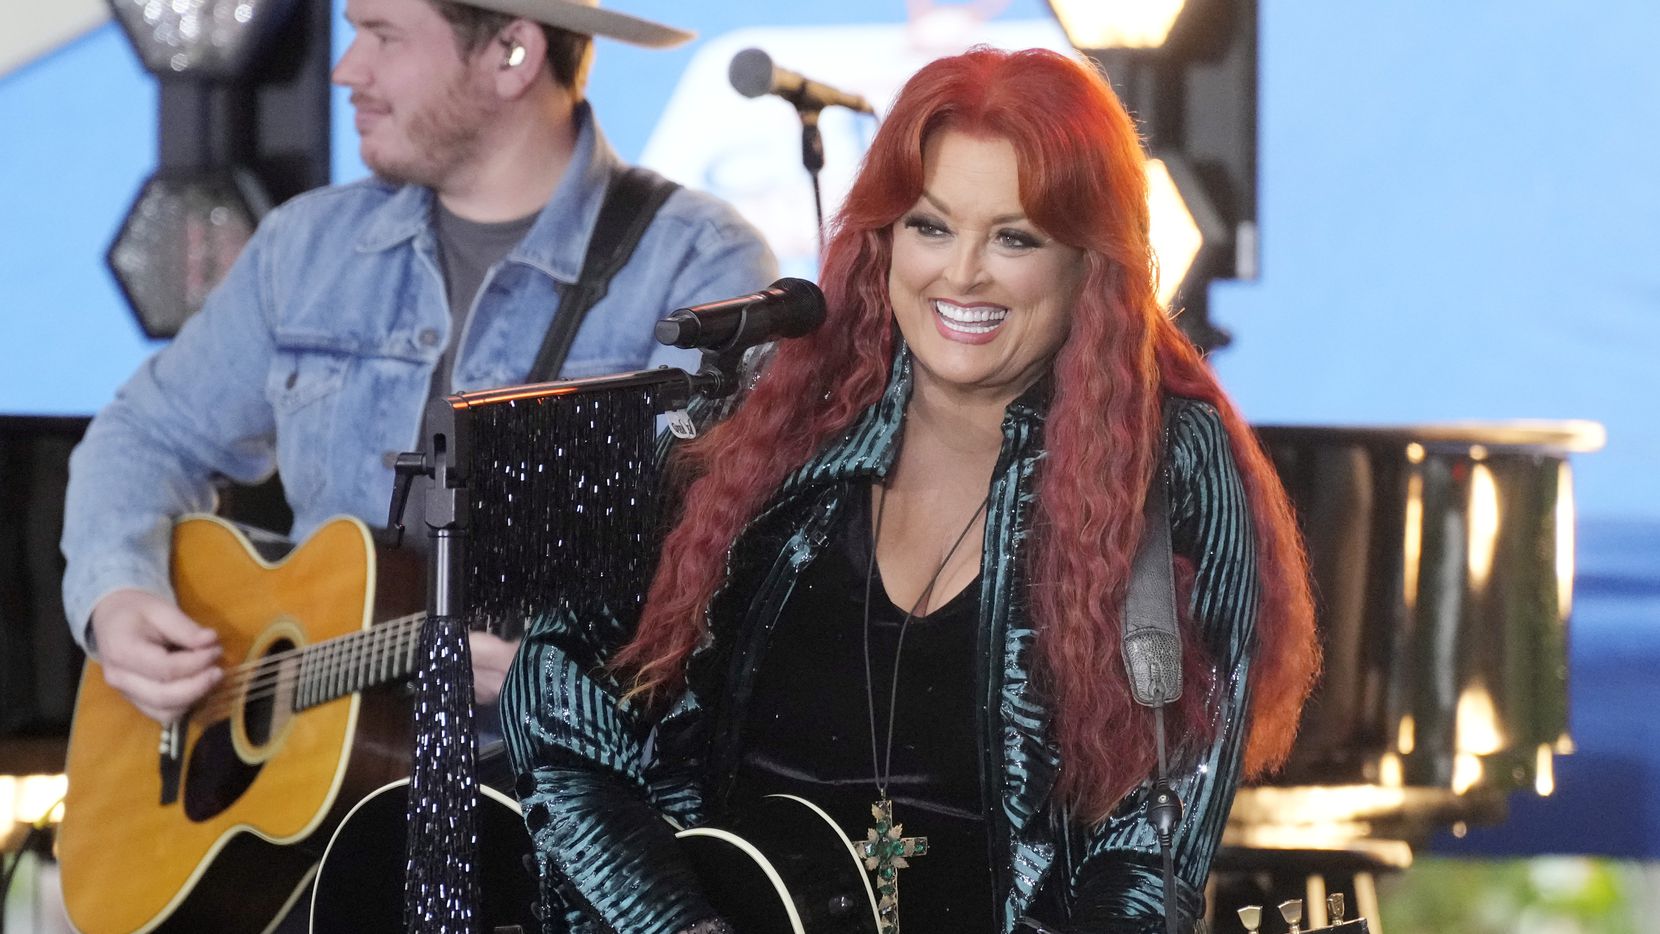 Wynonna Judd will perform on Nov. 19 at the Majestic Theatre in Dallas as part of her "Back...